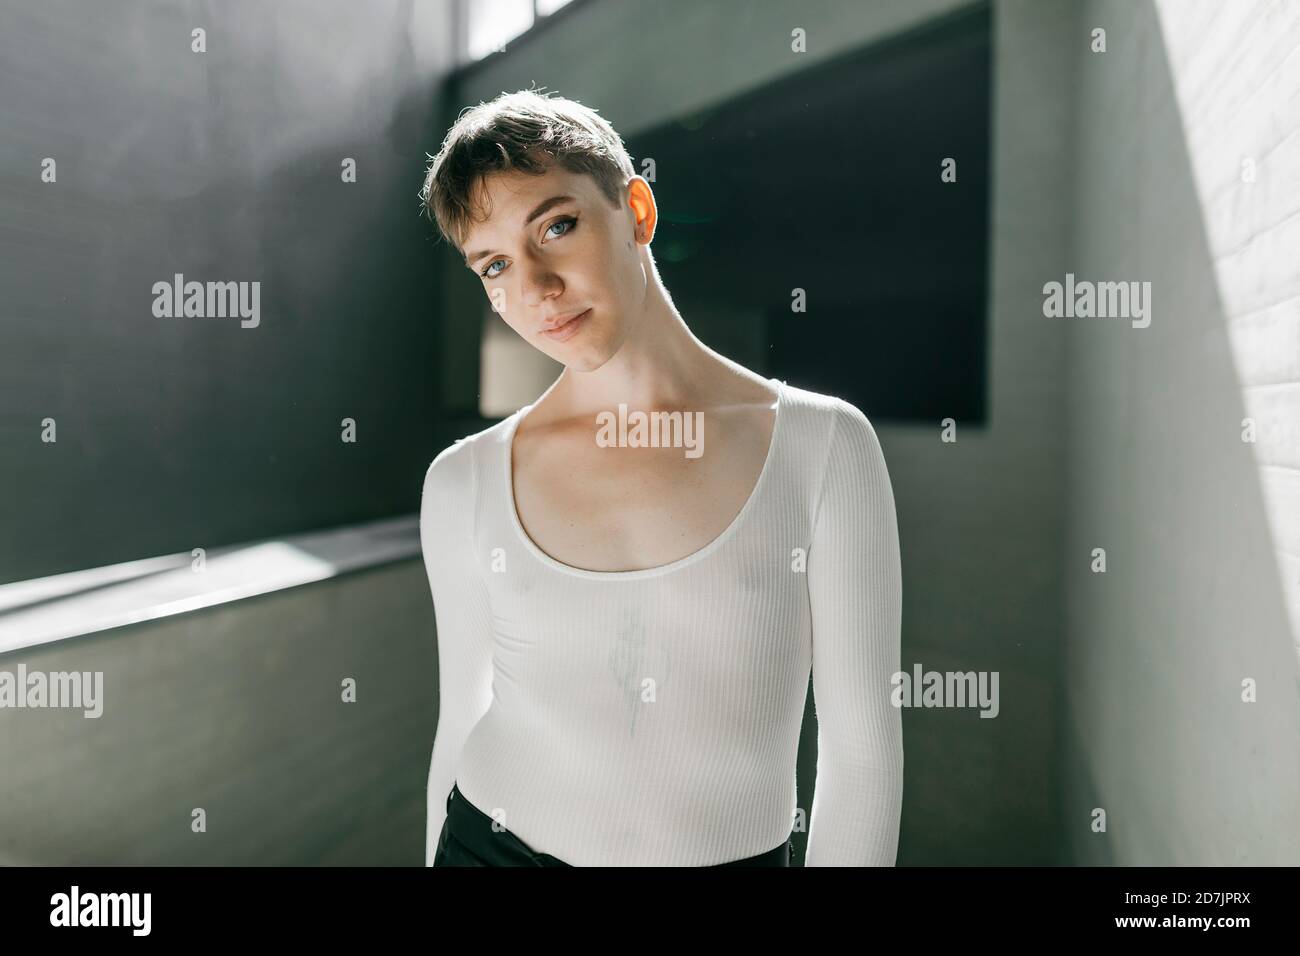 Trans young man wearing white leotard standing in basement Stock Photo